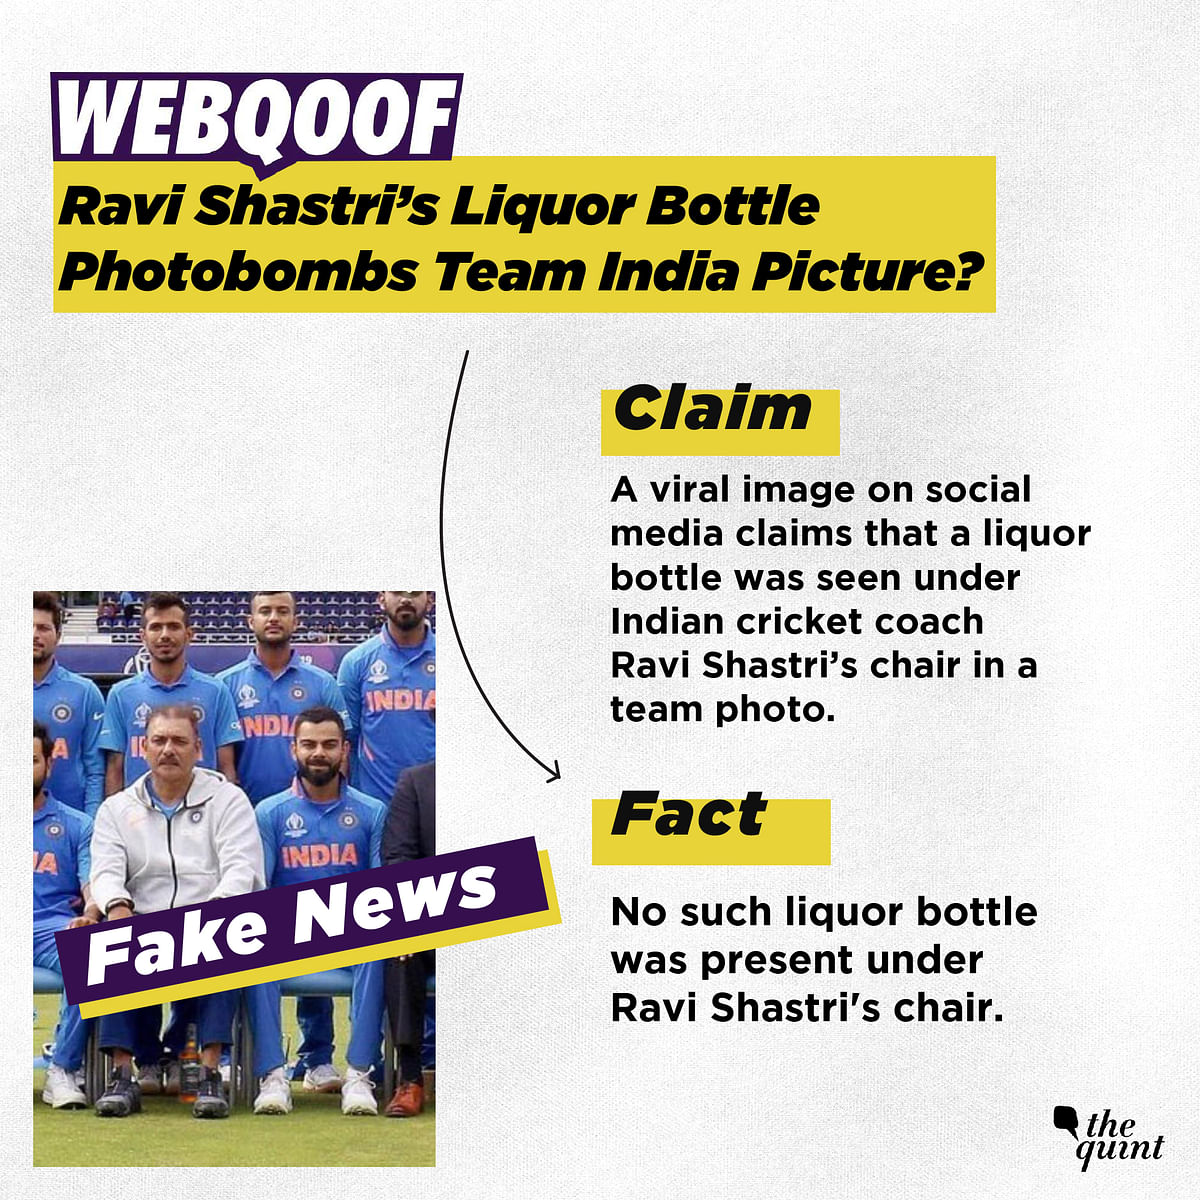 In the original image tweeted by BCCI, no liquor bottle can be seen under Indian cricket coach Ravi Shastri’s chair.